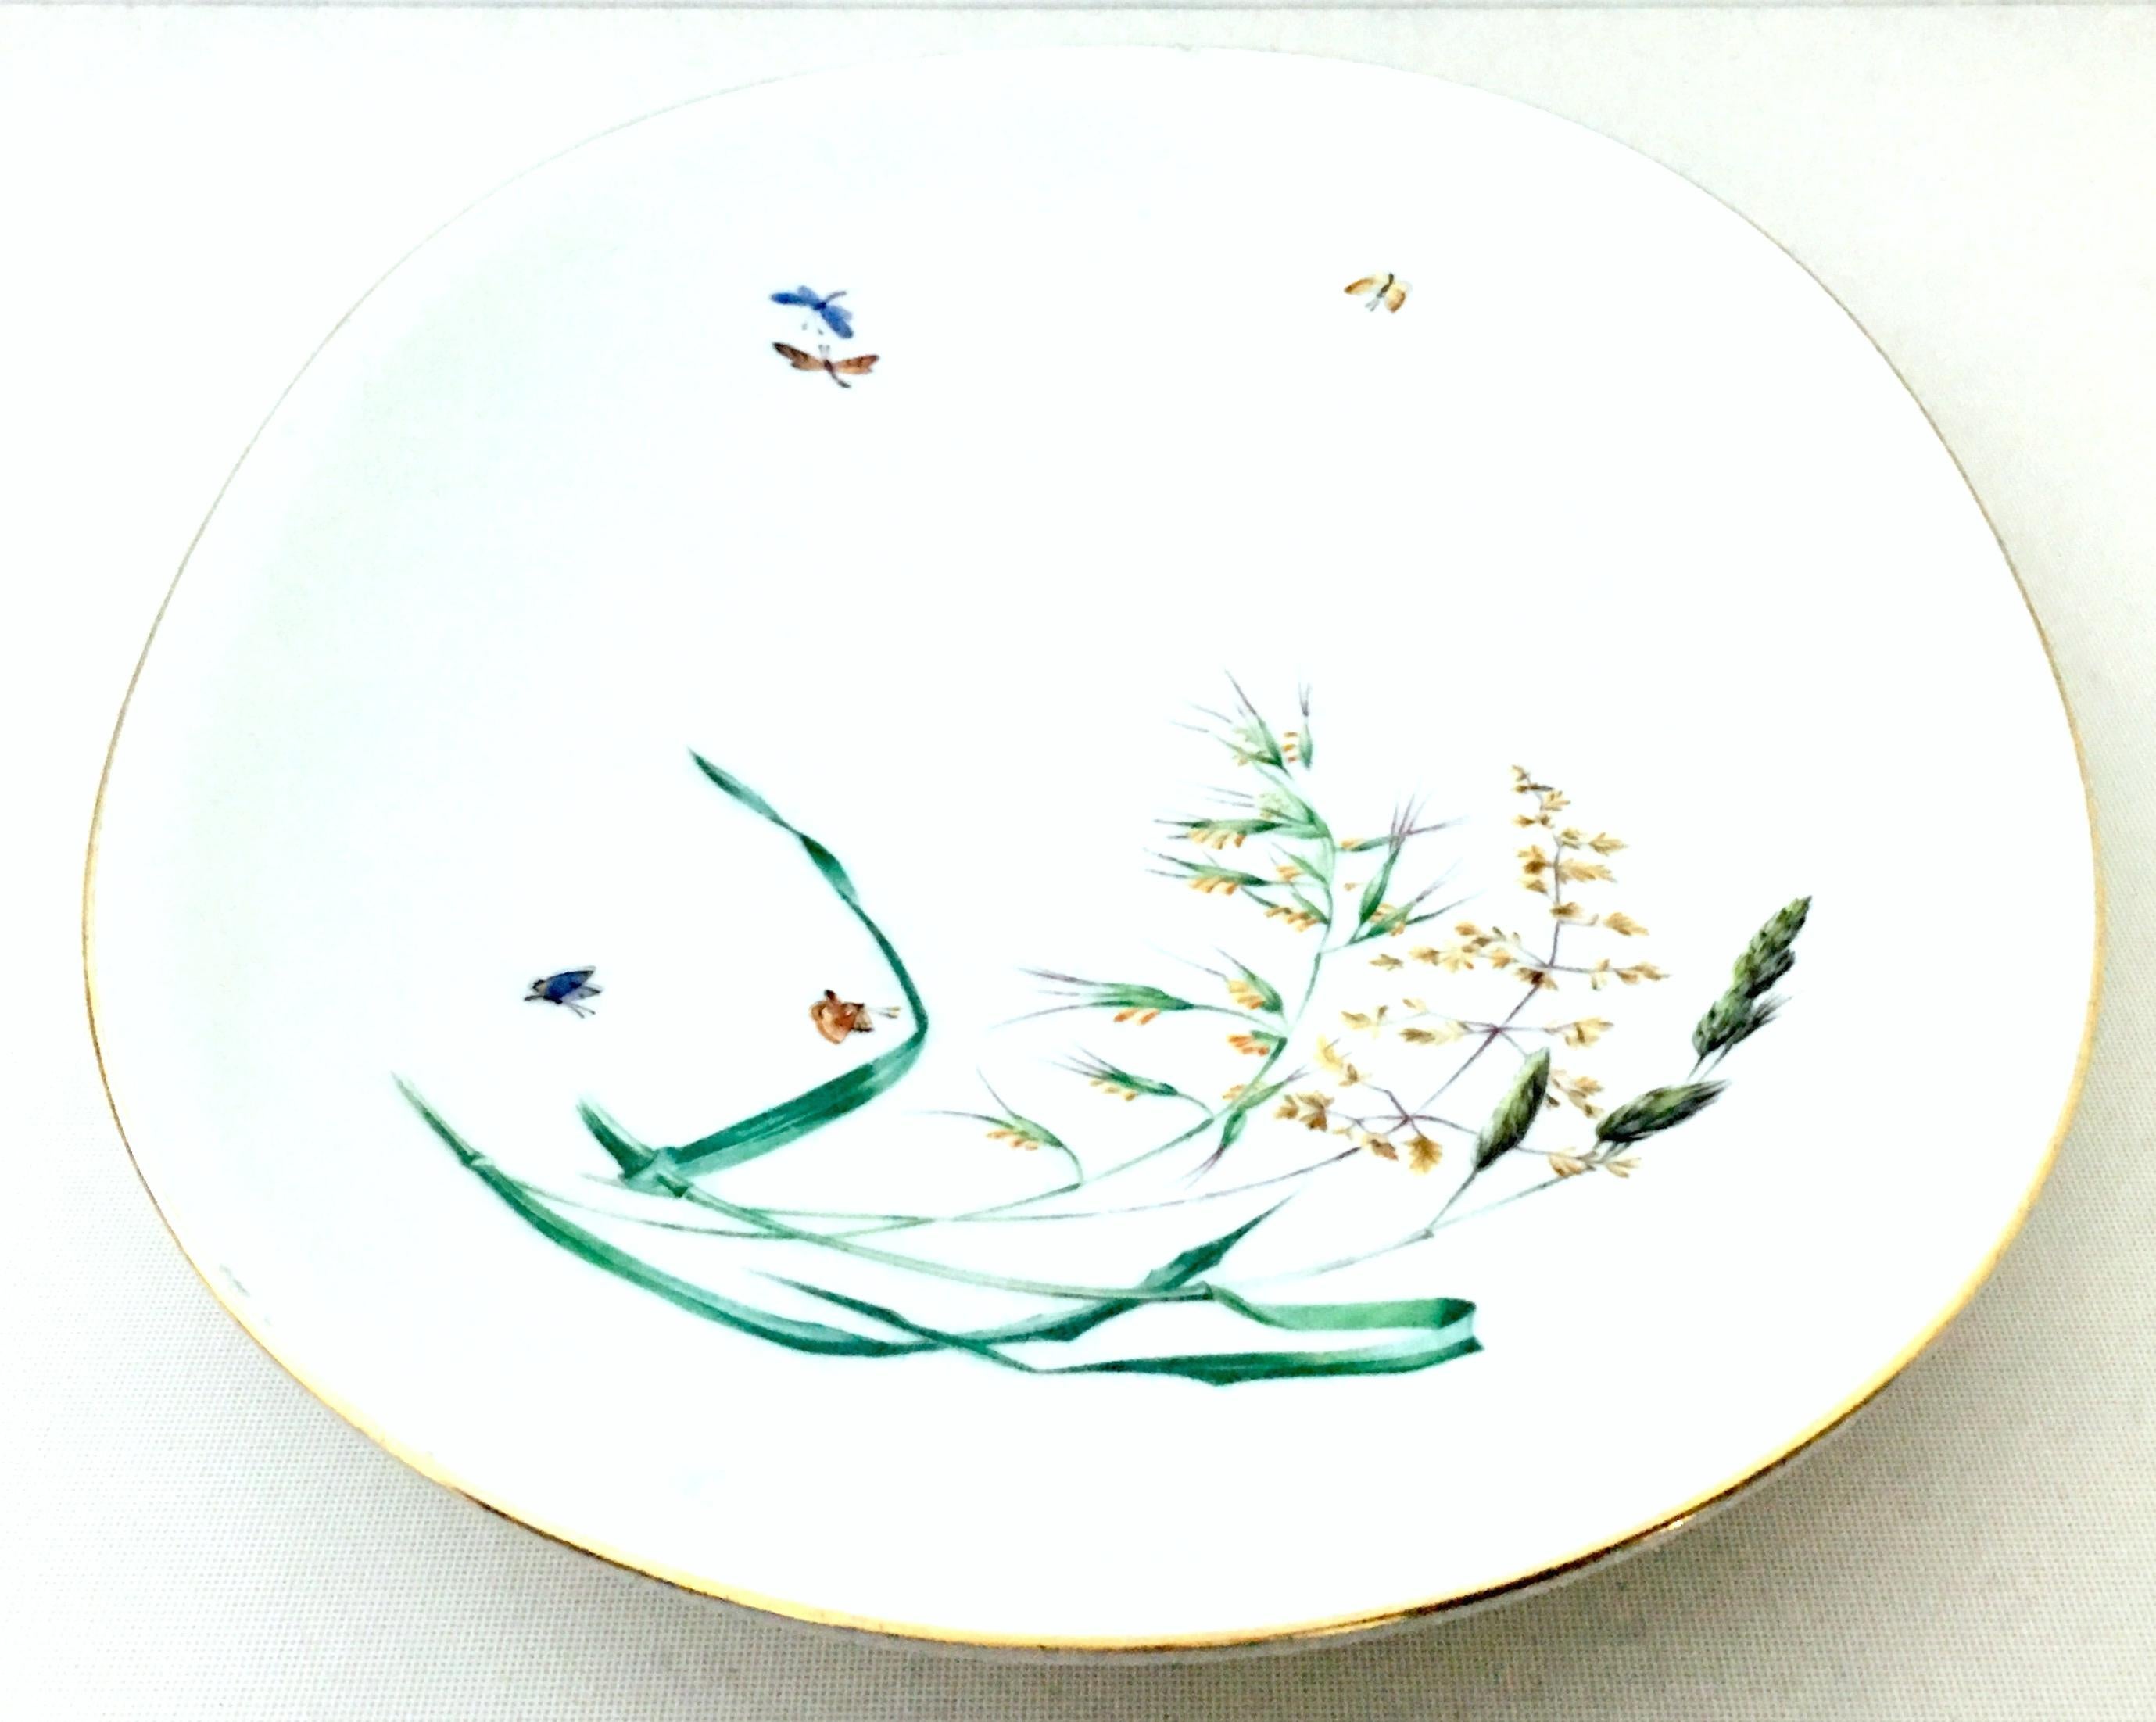 20th century German hand painted porcelain organic form oval platter with 22-karat gold rim edge by, Heinrich-H&C in the 